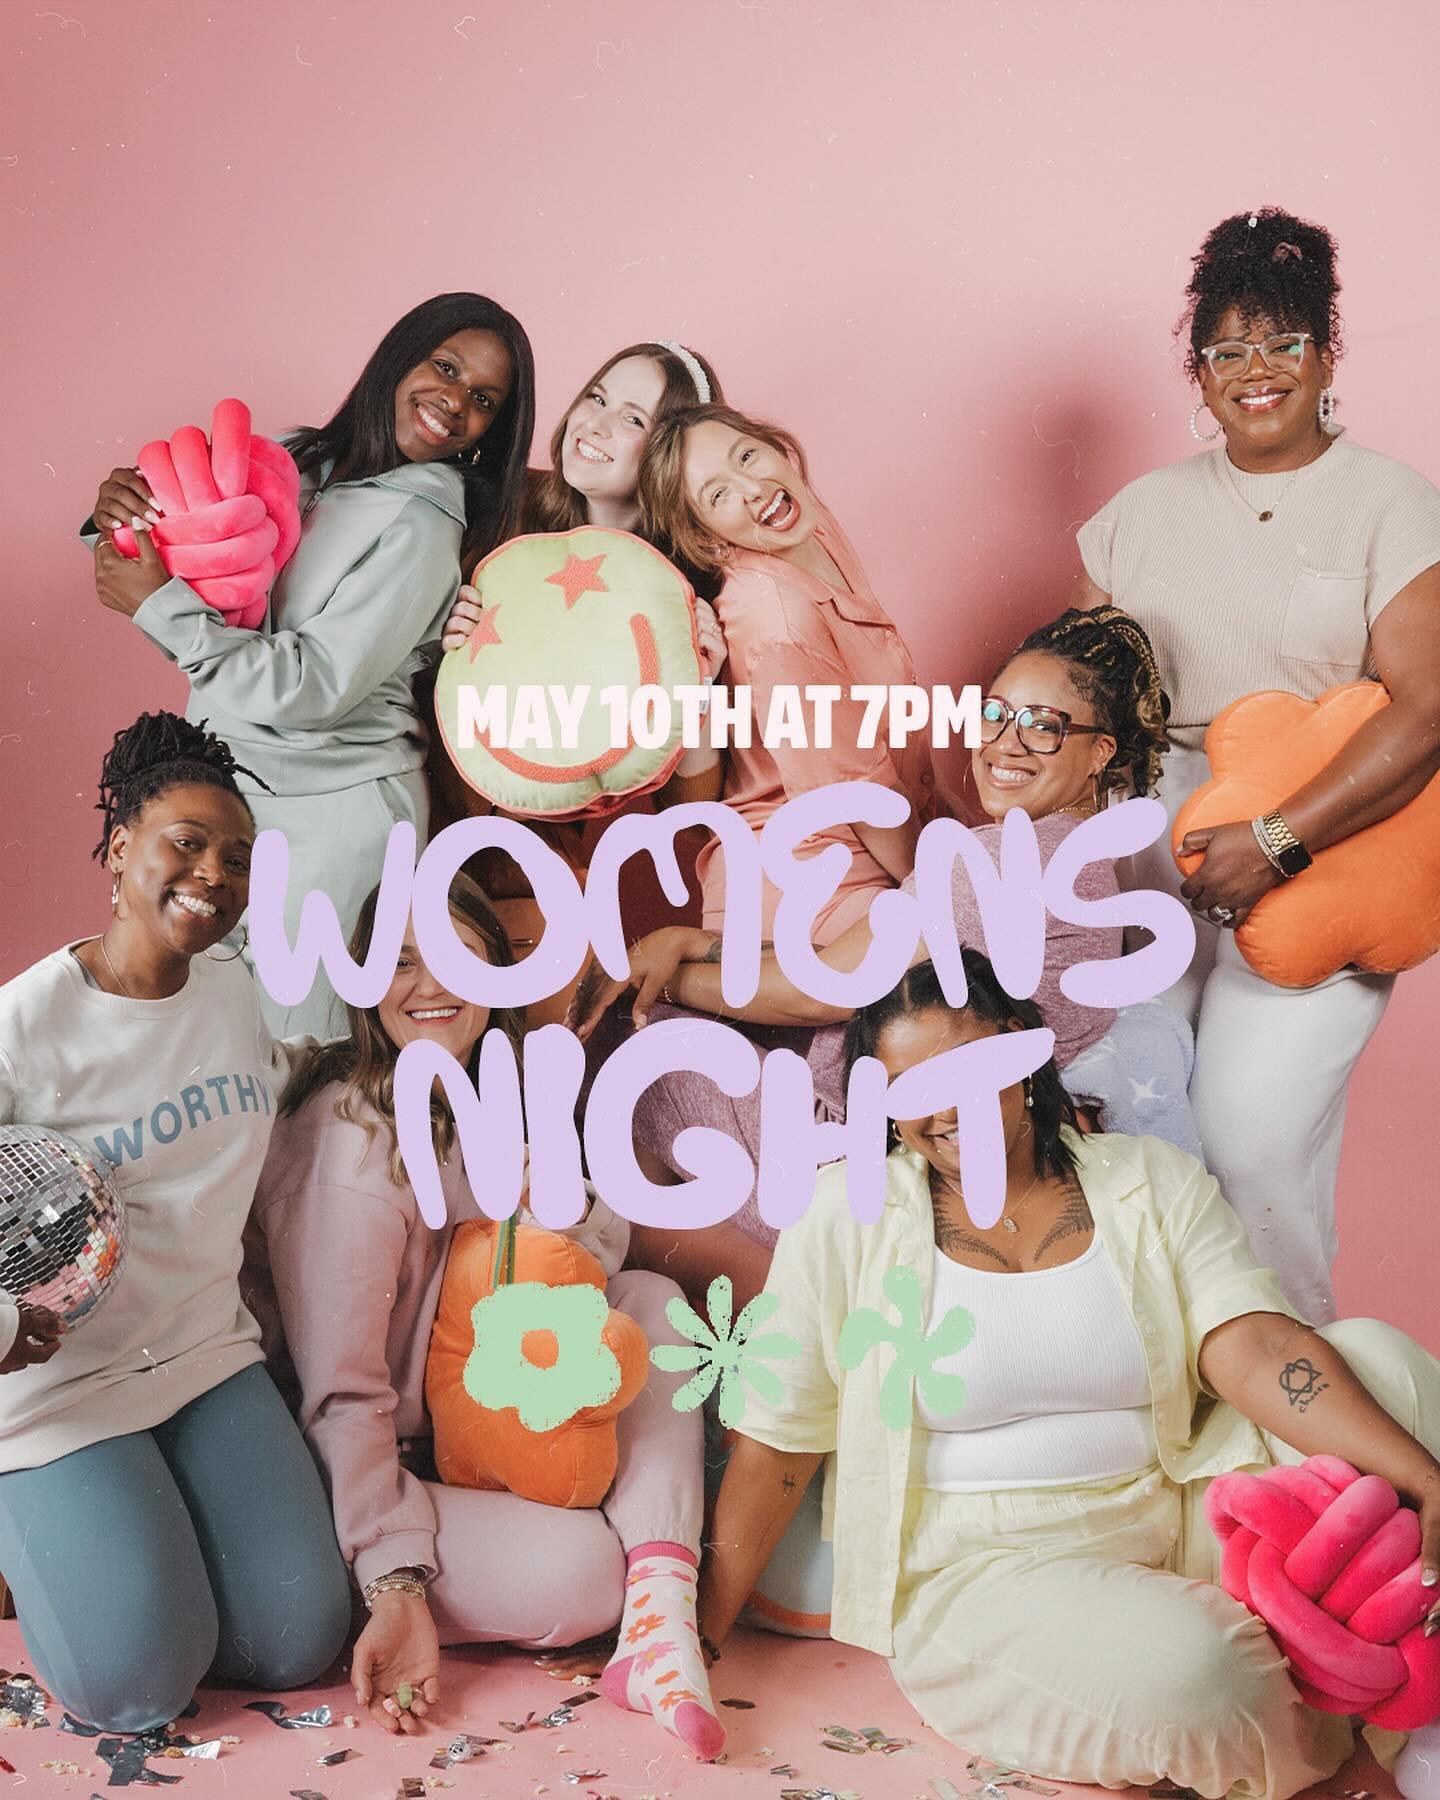 💞 CALLING ALL THE LADIES 💞

Women&rsquo;s Night 2024 is back in just a few weeks! Grab the best women in your life for a night of fun, relaxation, live music and community! Here&rsquo;s what&rsquo;s happening: 

✨ Hair Bar 
✨ DIY Activities 
✨ Game